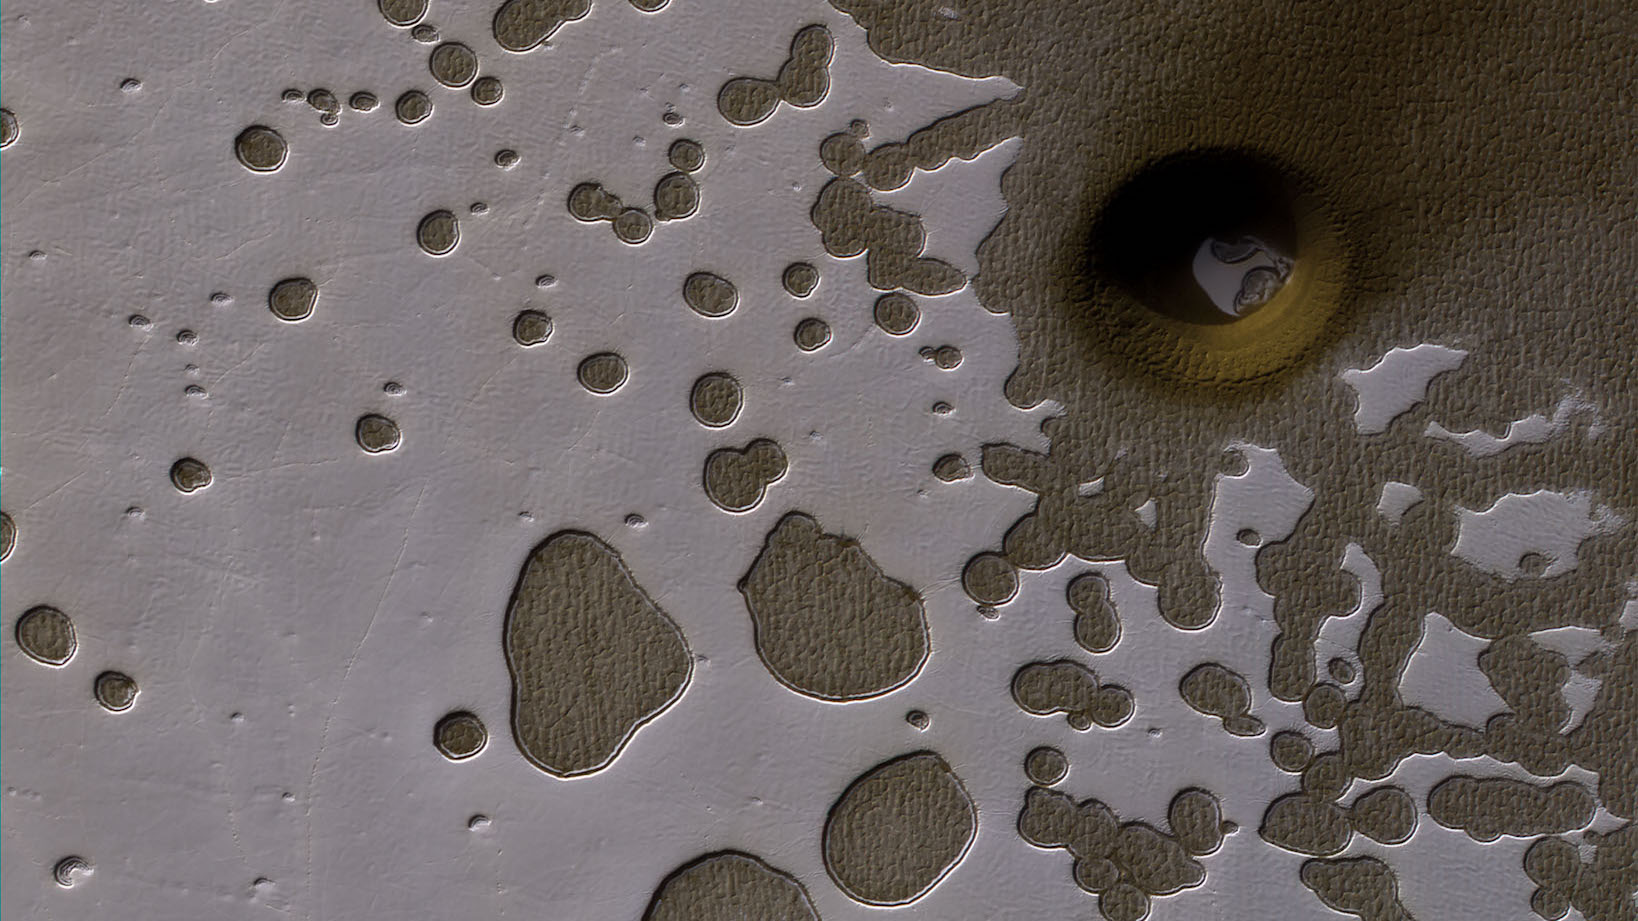 Mysterious Circular Depression Discovered in Mars’ ‘Swiss Cheese Terrain’